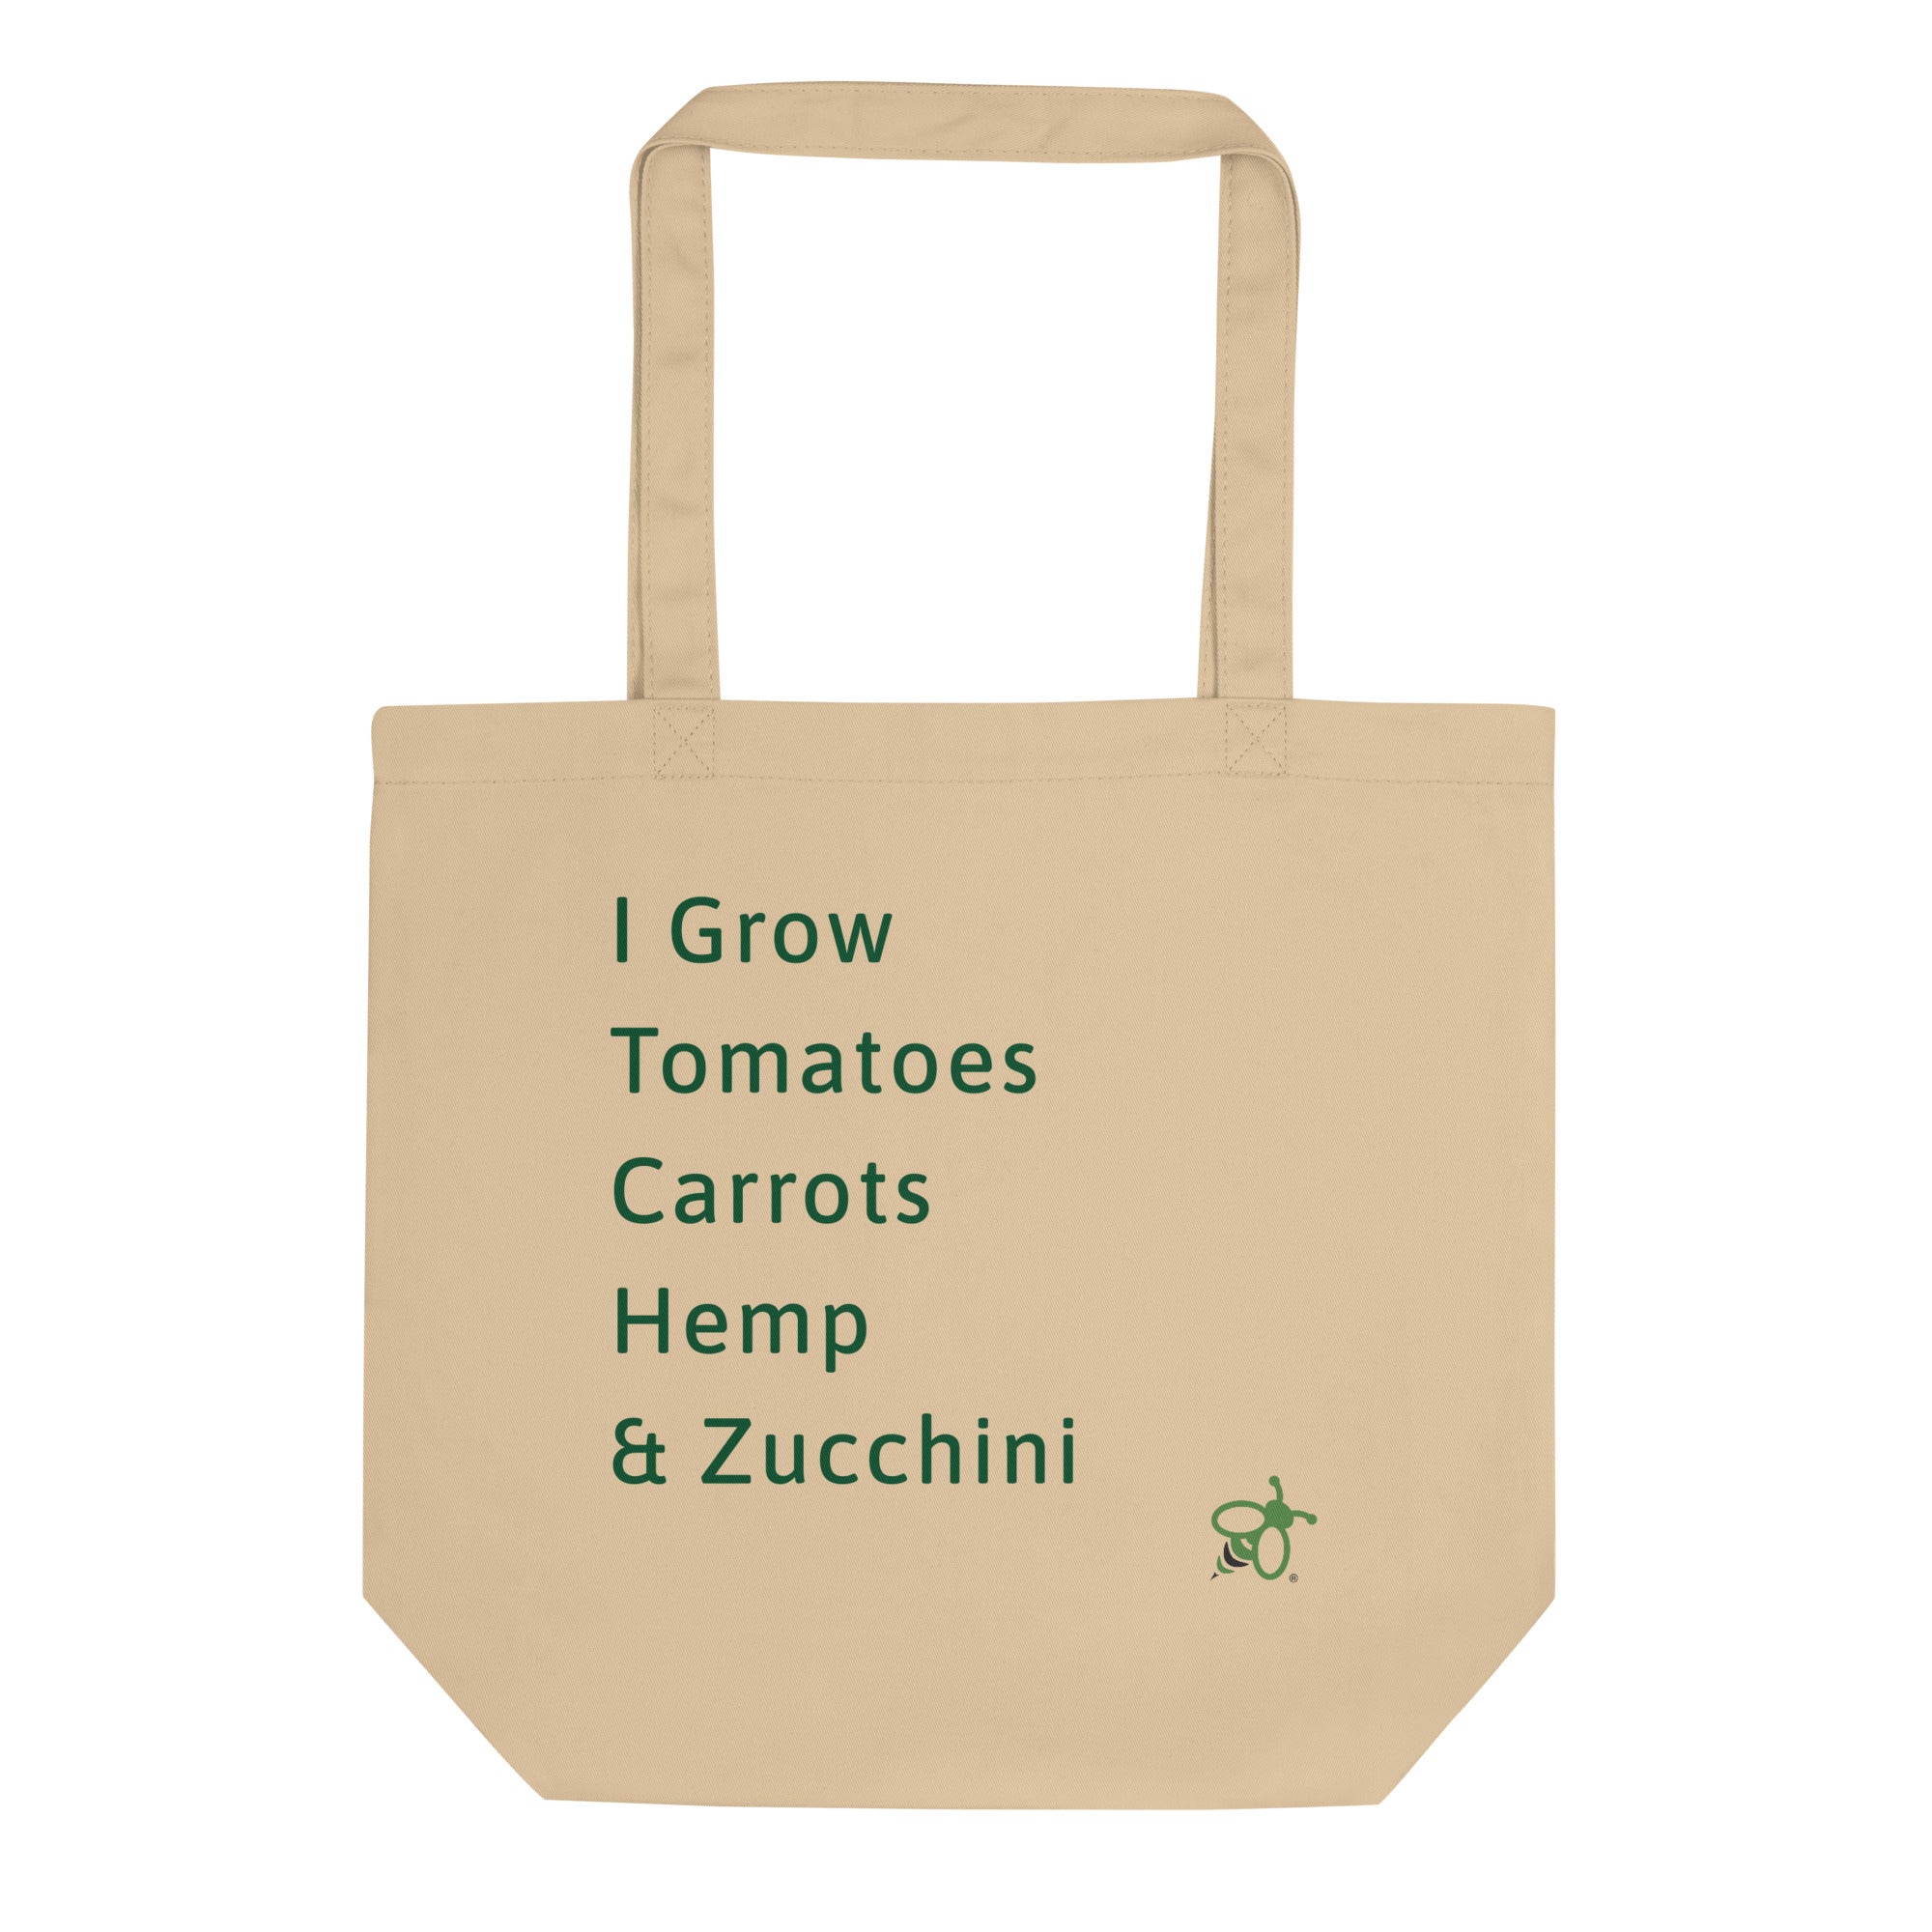 eco friendly bags quote | Bag quotes, Bags, Eco friendly bags